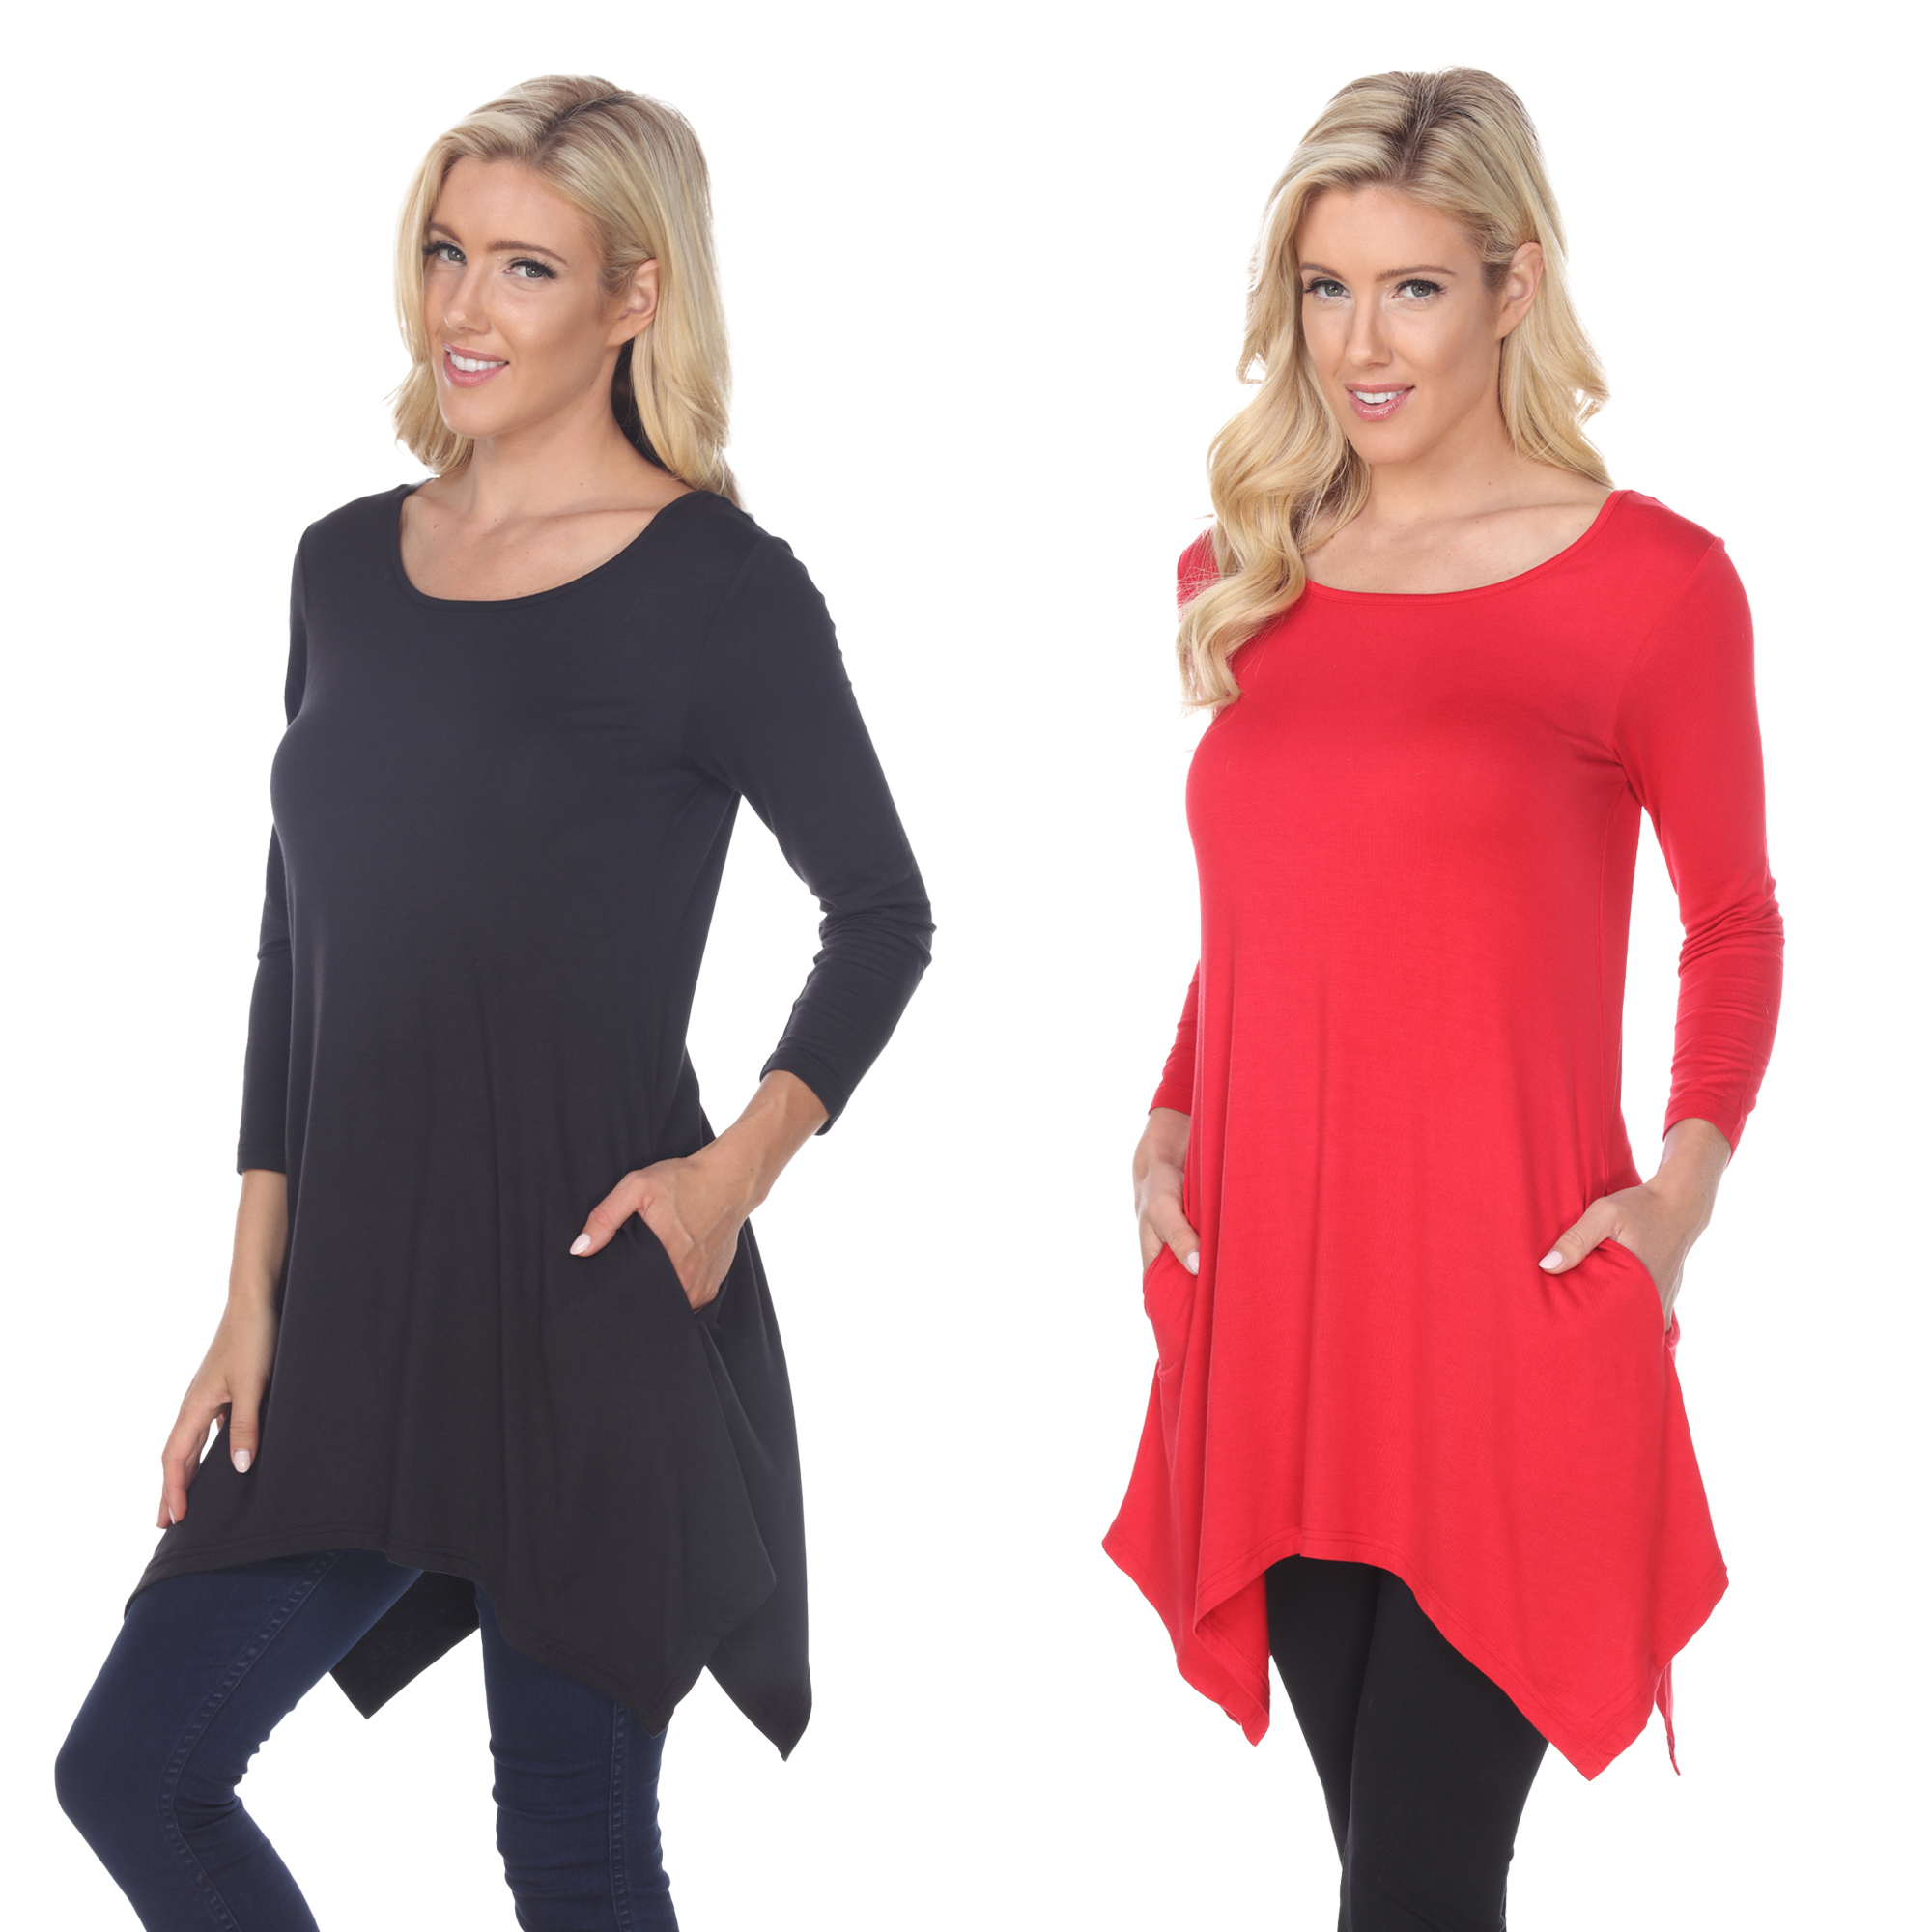 White Mark Women's Pack Of 2 Black Tunic Top - Black, Red, Large